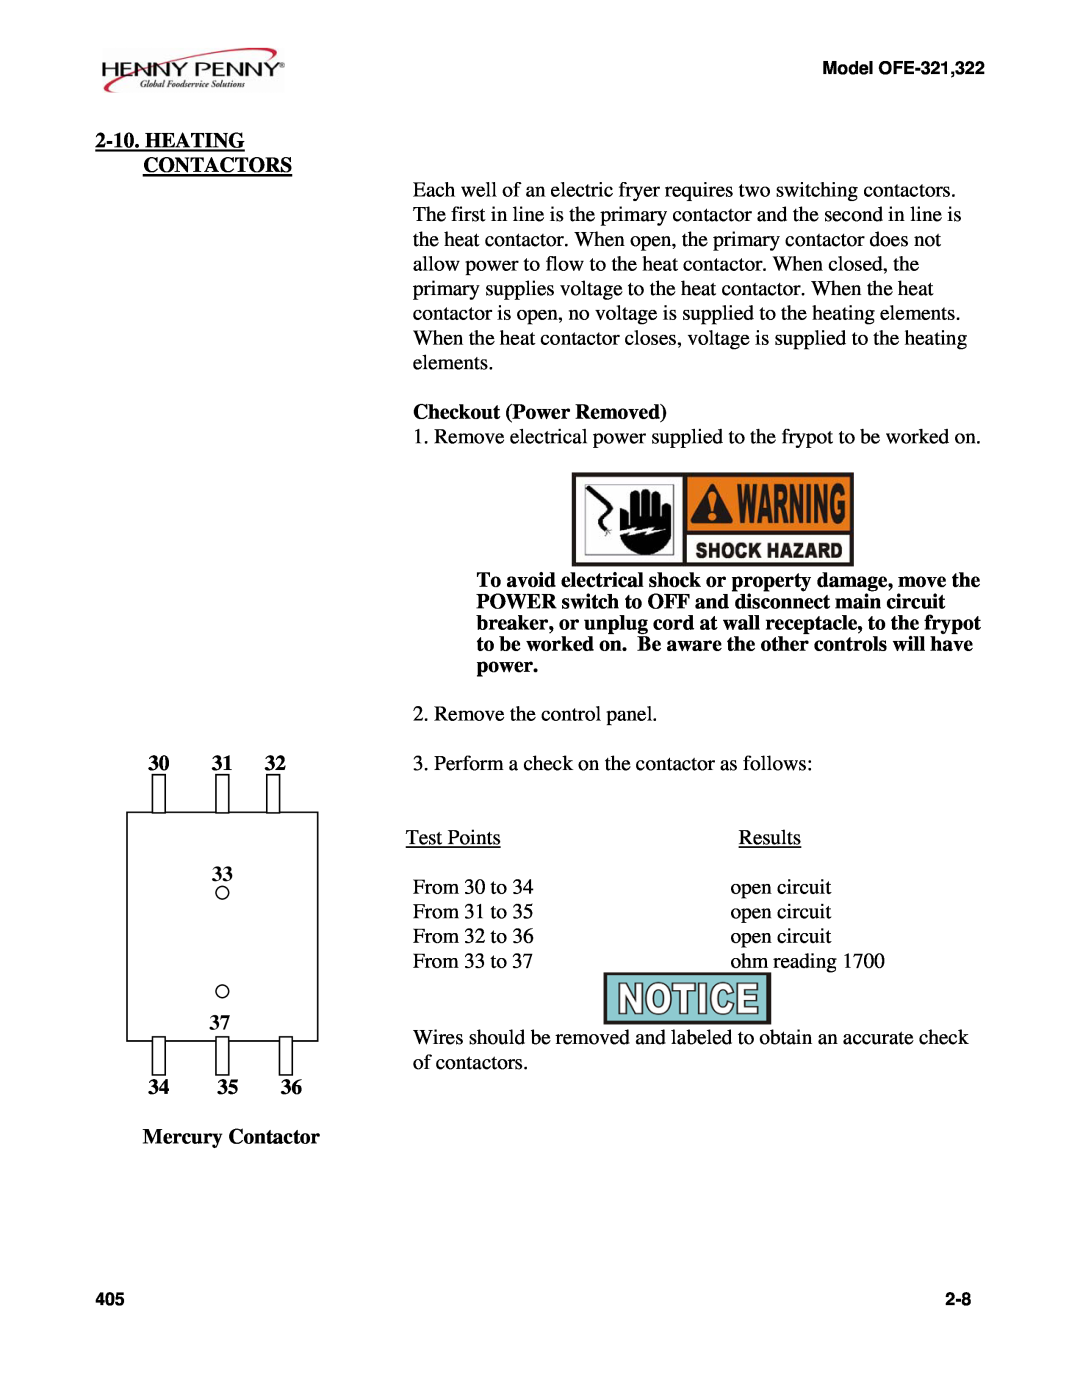 Henny Penny OFE-321 manual HEATING CONTACTORS 3031 33, Mercury Contactor, Checkout Power Removed 